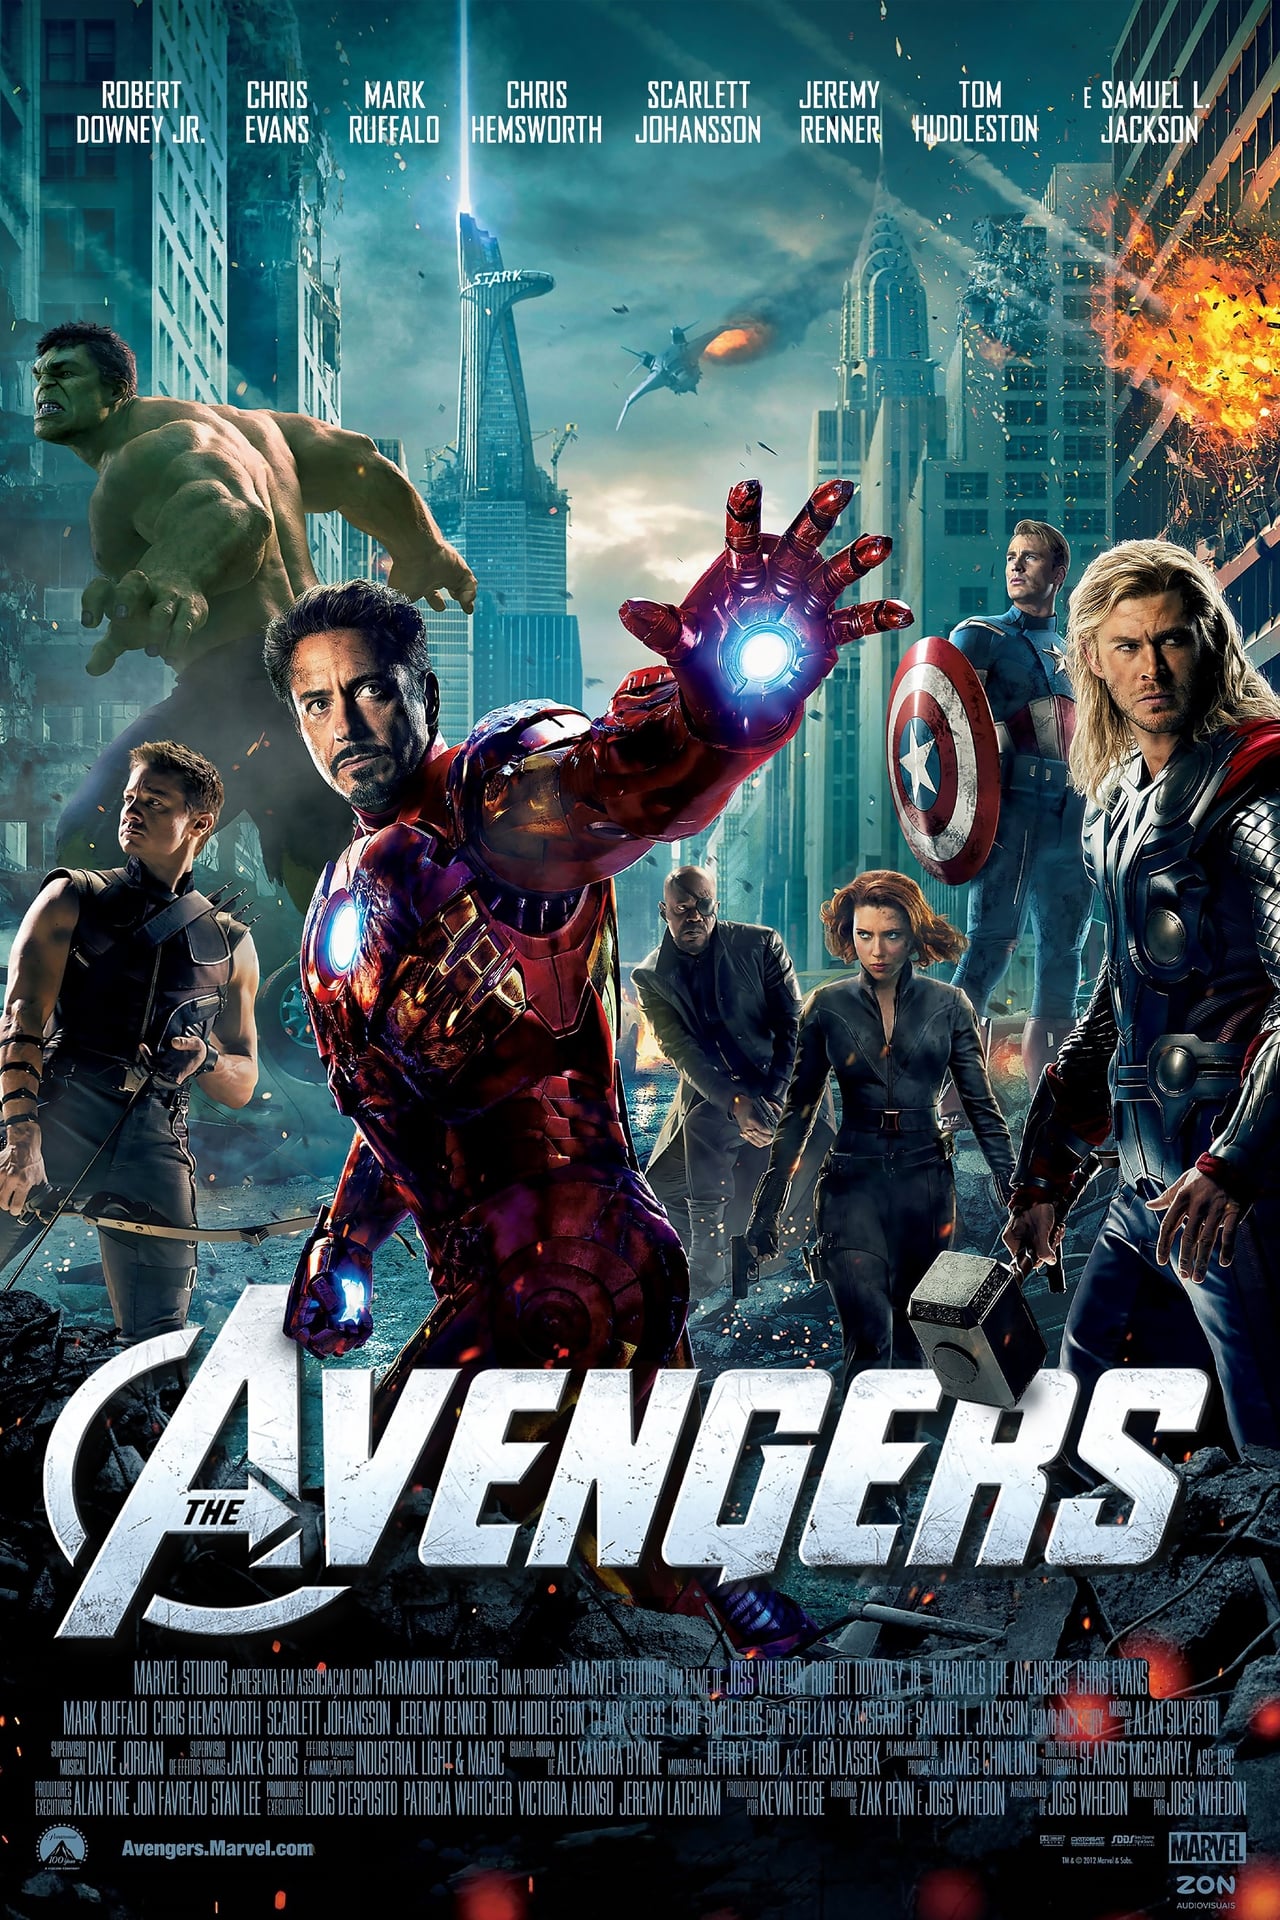 Watch Full The Avengers (2012) Online Movie at get.playnowstore.com